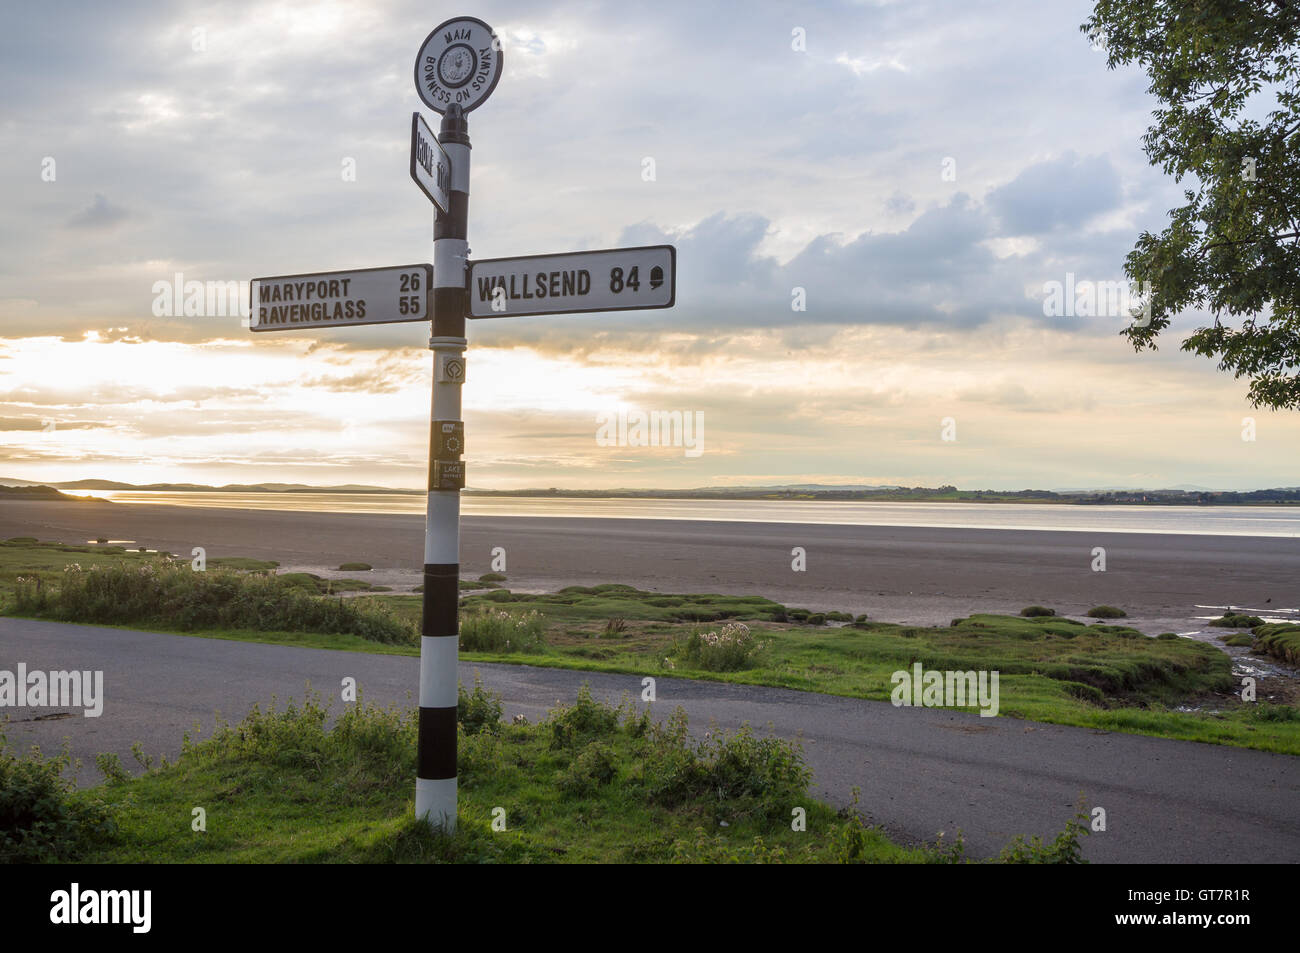 Fingerpost sign showing distances to Wallsend, Maryport and Rome Solway Firth at sunset, Bowness-on Solway, Cumbria, England Stock Photo